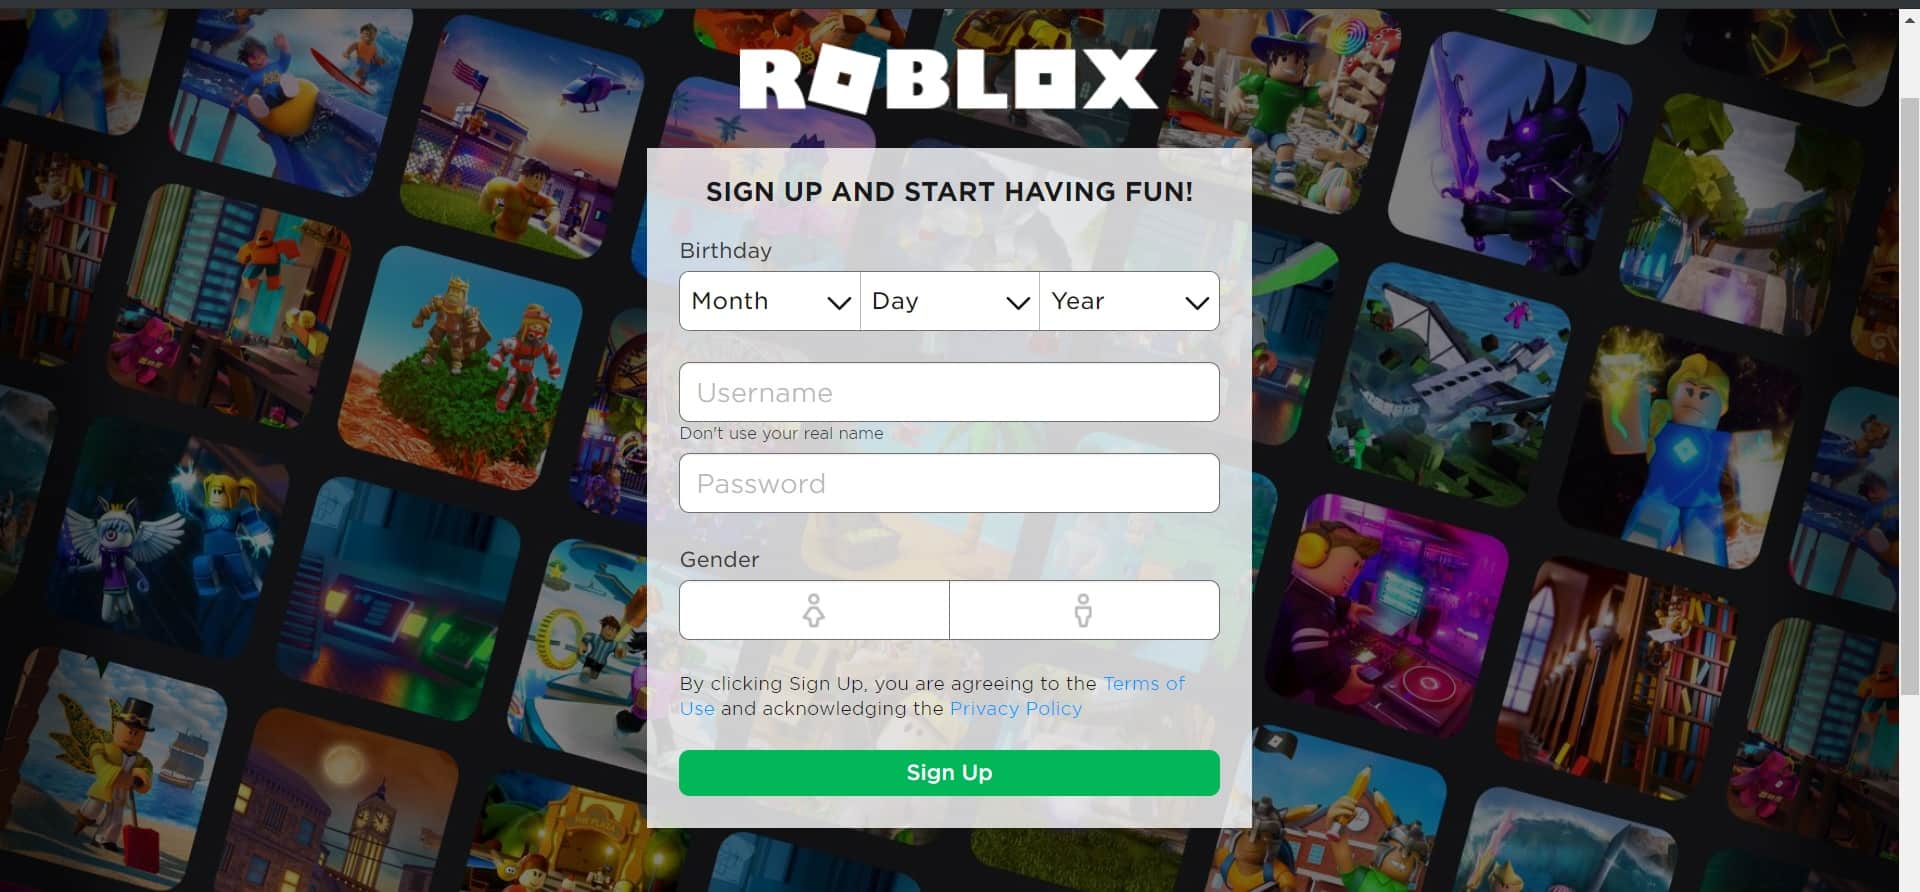 how many games are there in roblox right now